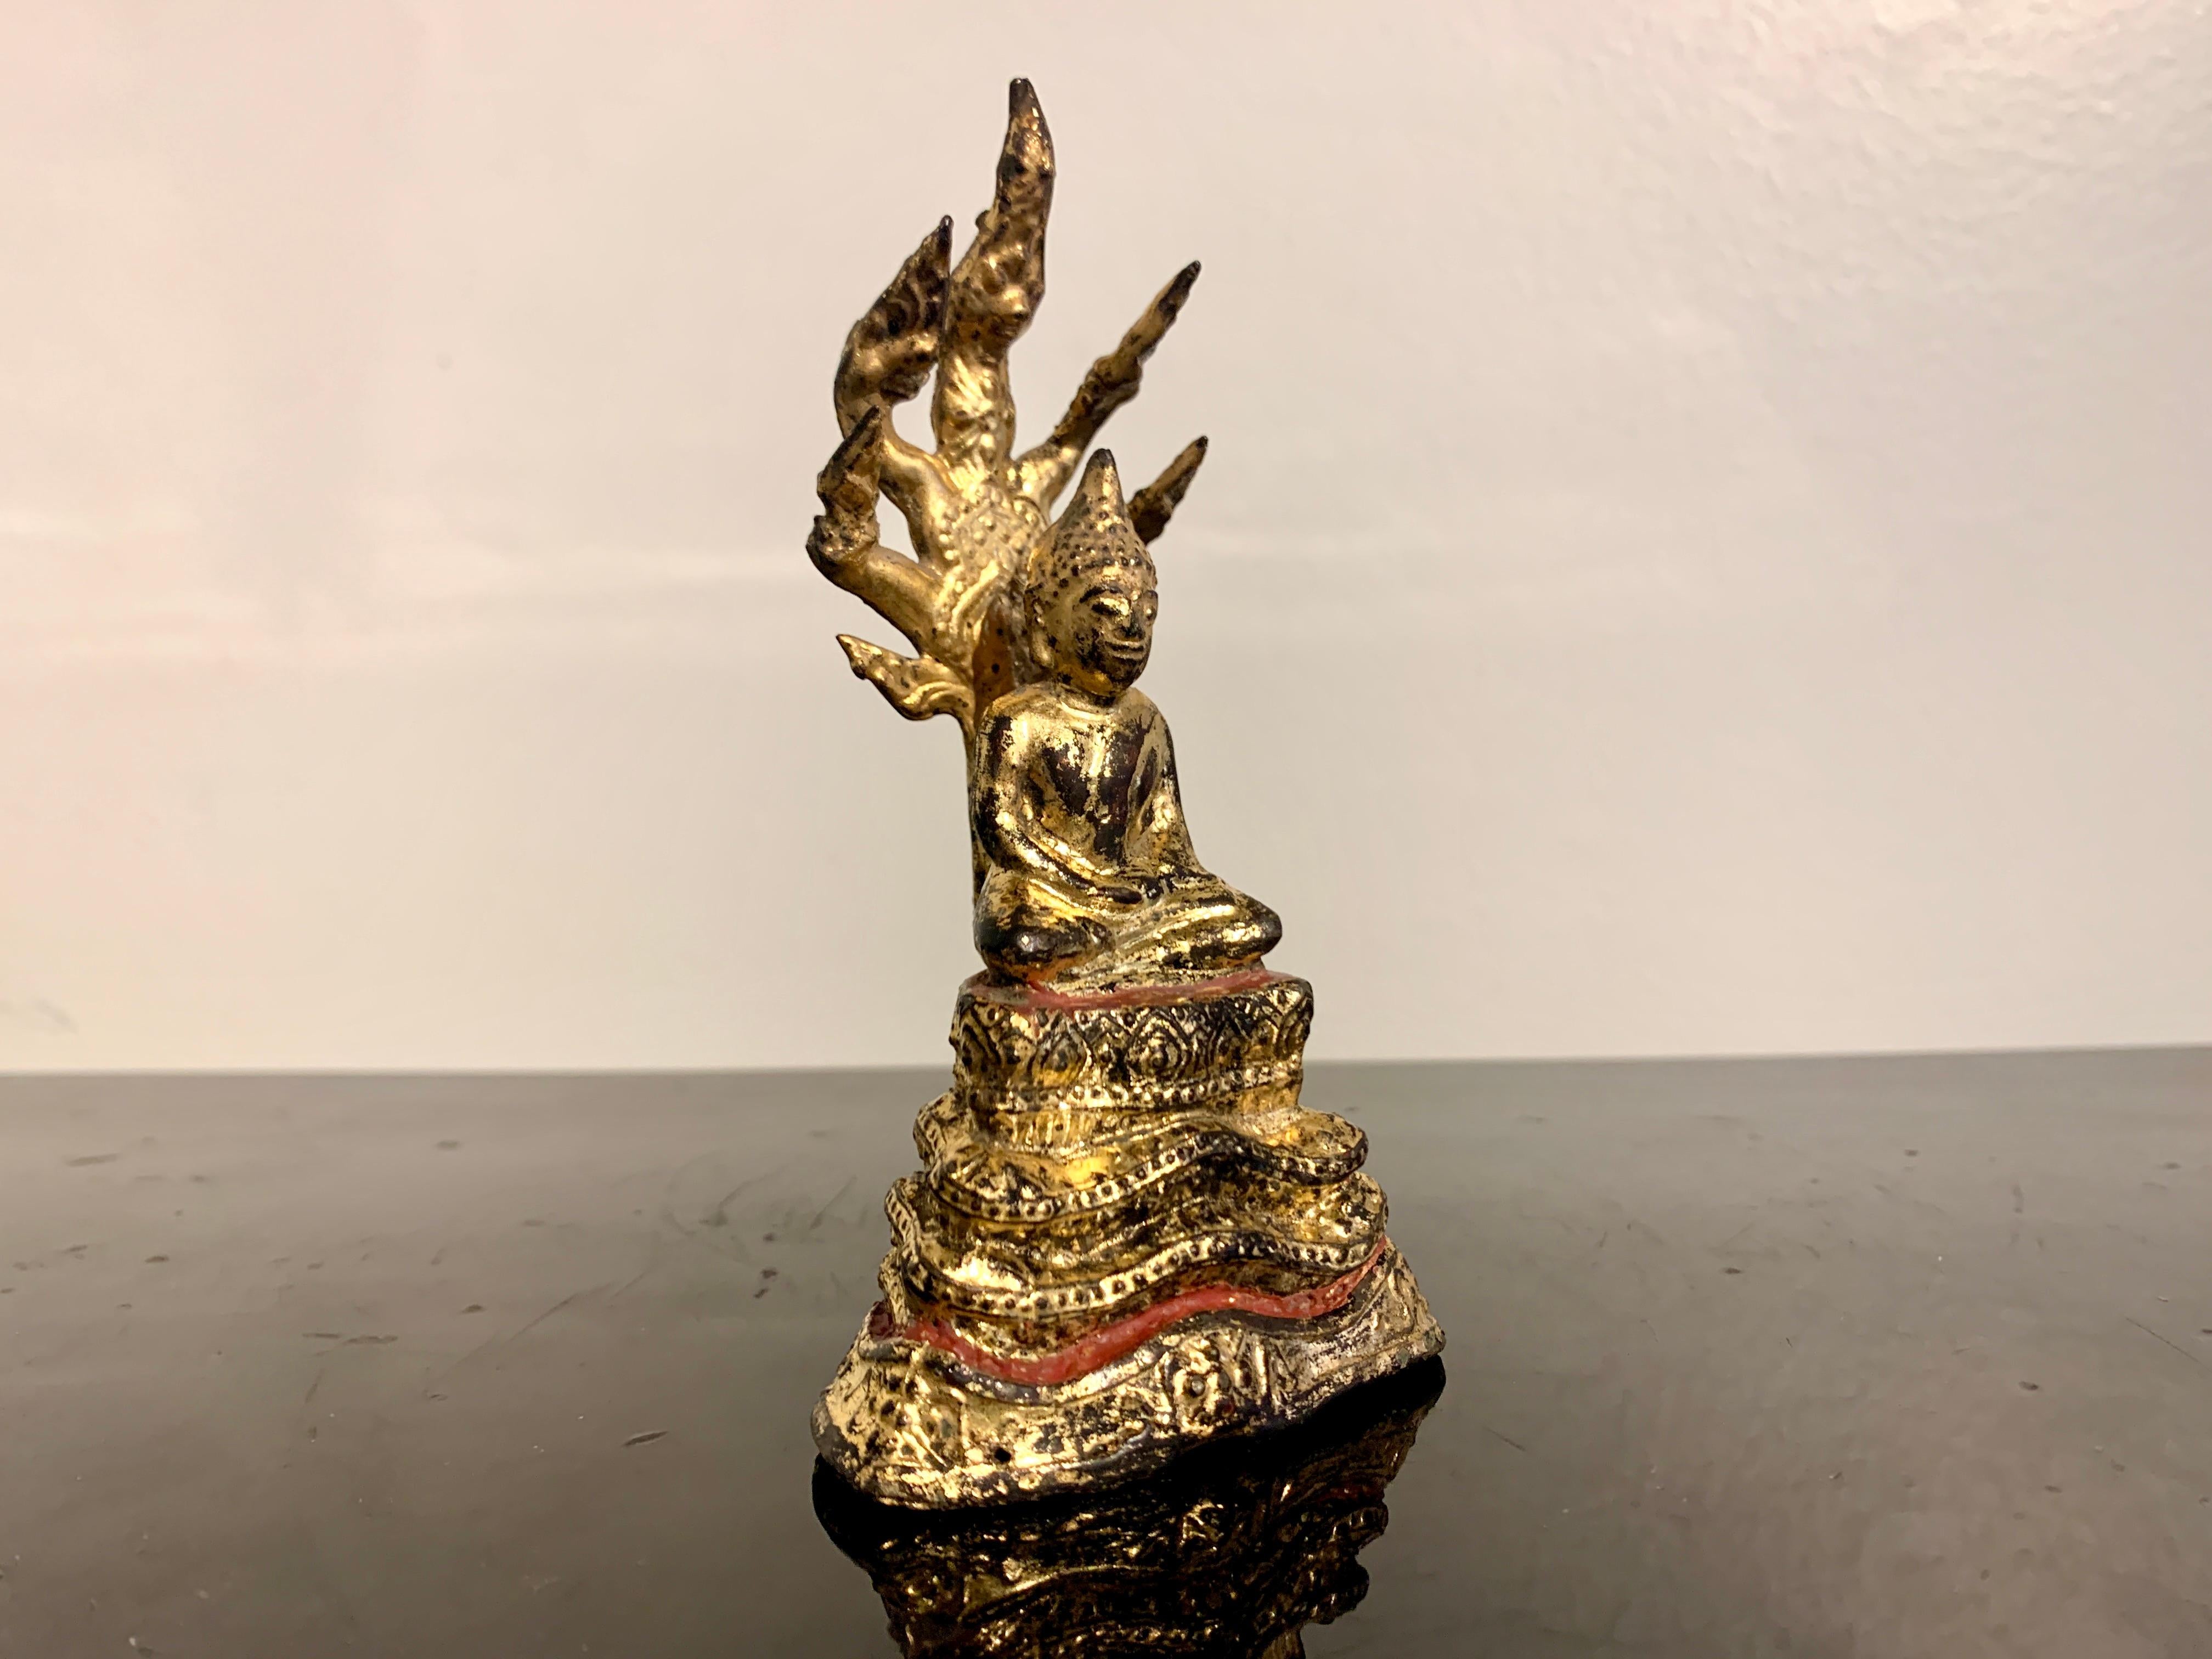 A small and charming Thai cast and gilt bronze figure of the Buddha sheltered by a Naga, Buddha Muchalinda, Rattanakosin Period, 19th century, Thailand.

This diminutive sculpture portrays the historical Buddha Shakyamuni in meditation. He is